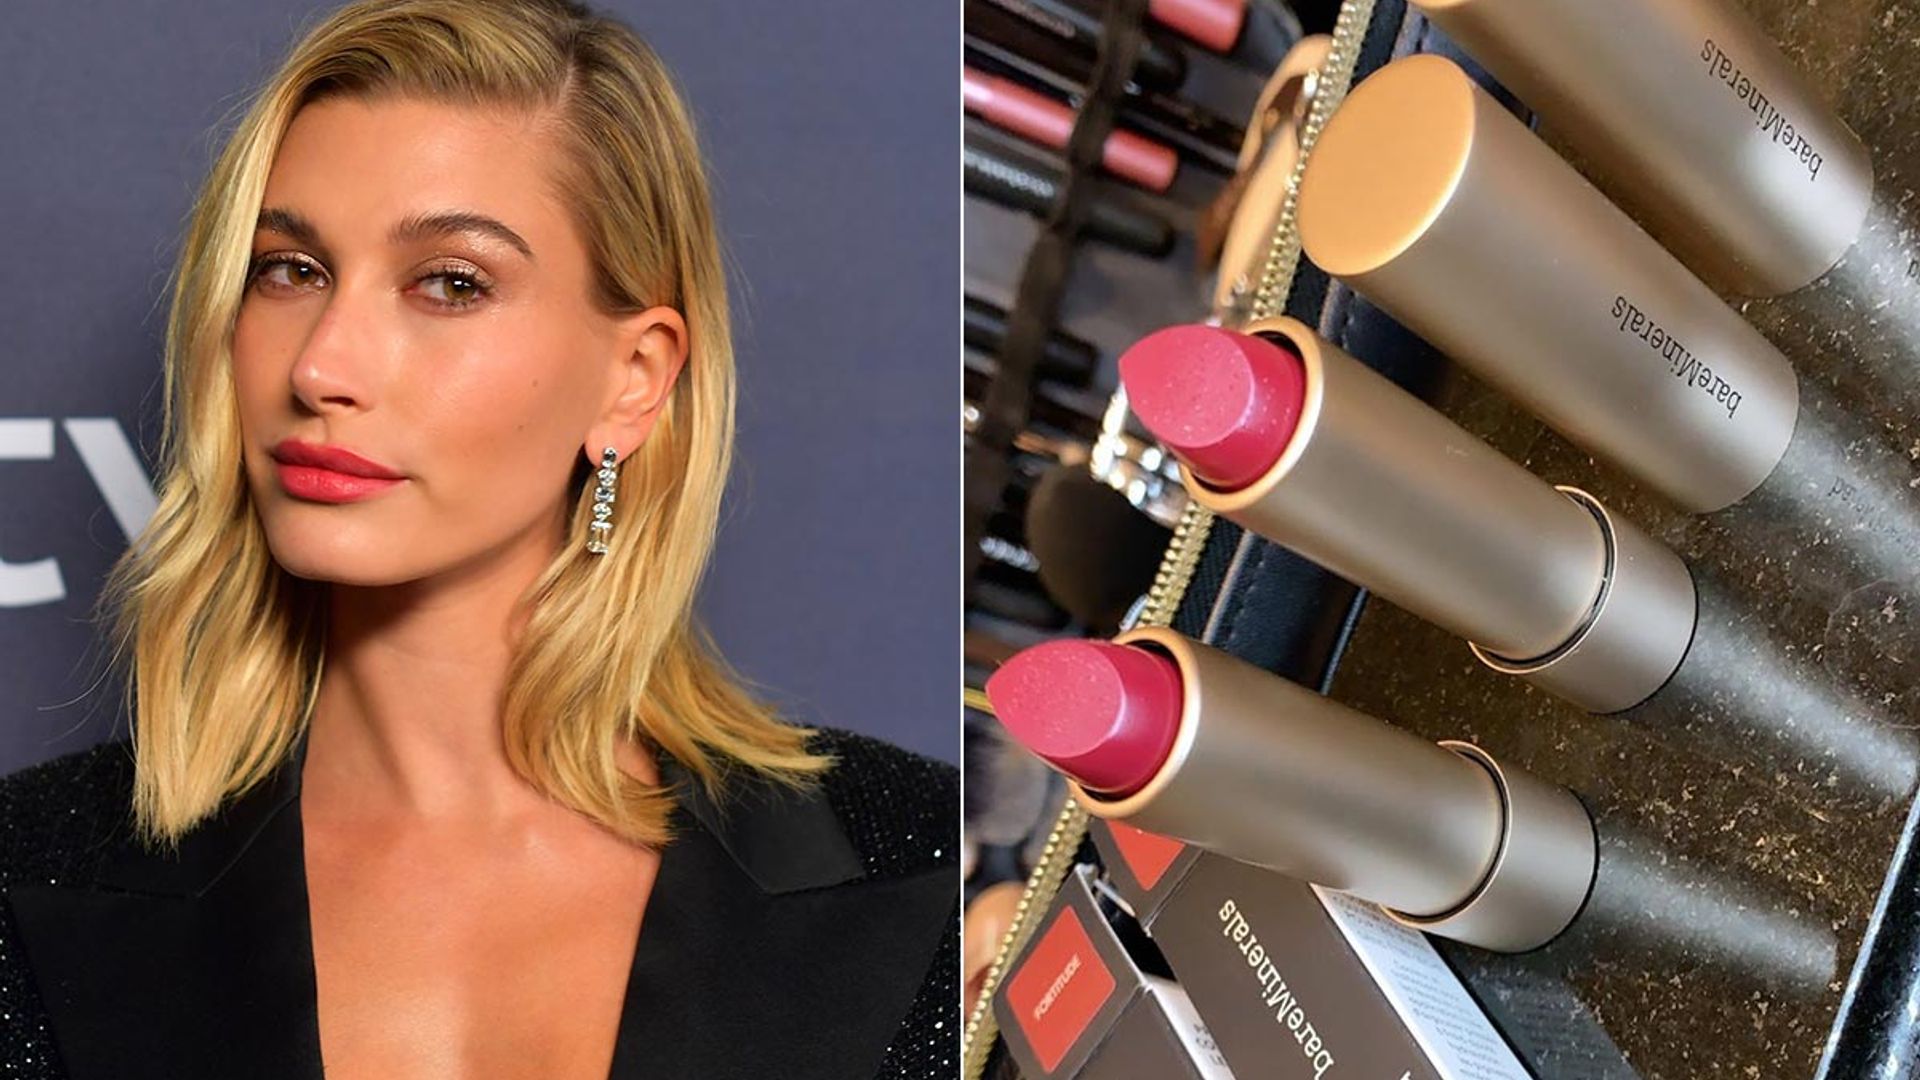 Hailey Bieber gives a sneak peek of a new beauty product at the Golden Globes after-party